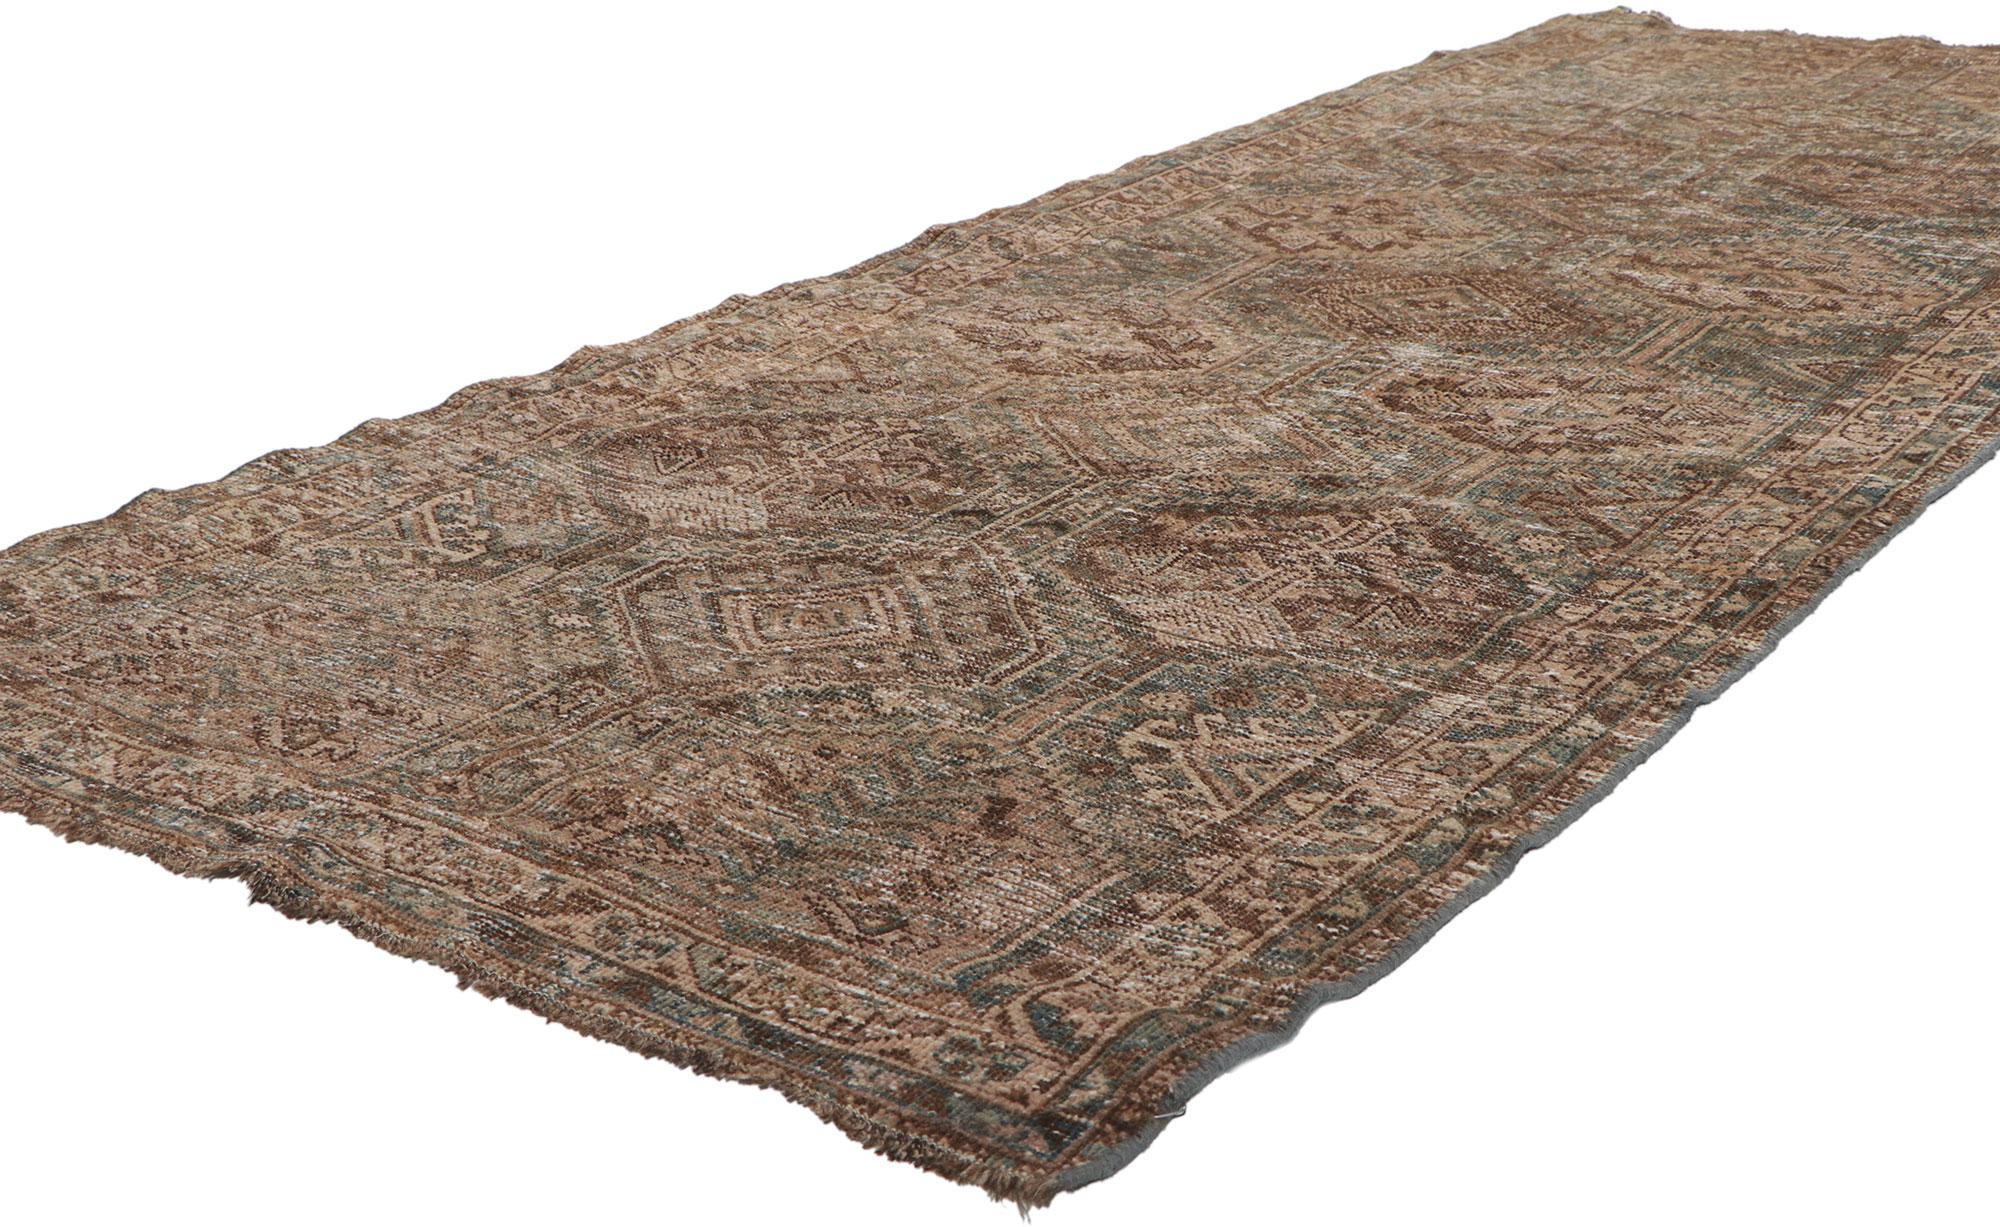 60960 Distressed Antique Persian Malayer Rug, 03'04 x 08'07. Antique-washed Persian Malayer carpet runners are long, narrow rugs handcrafted in the Malayer region of western Iran and treated with a special antique washing process to achieve a